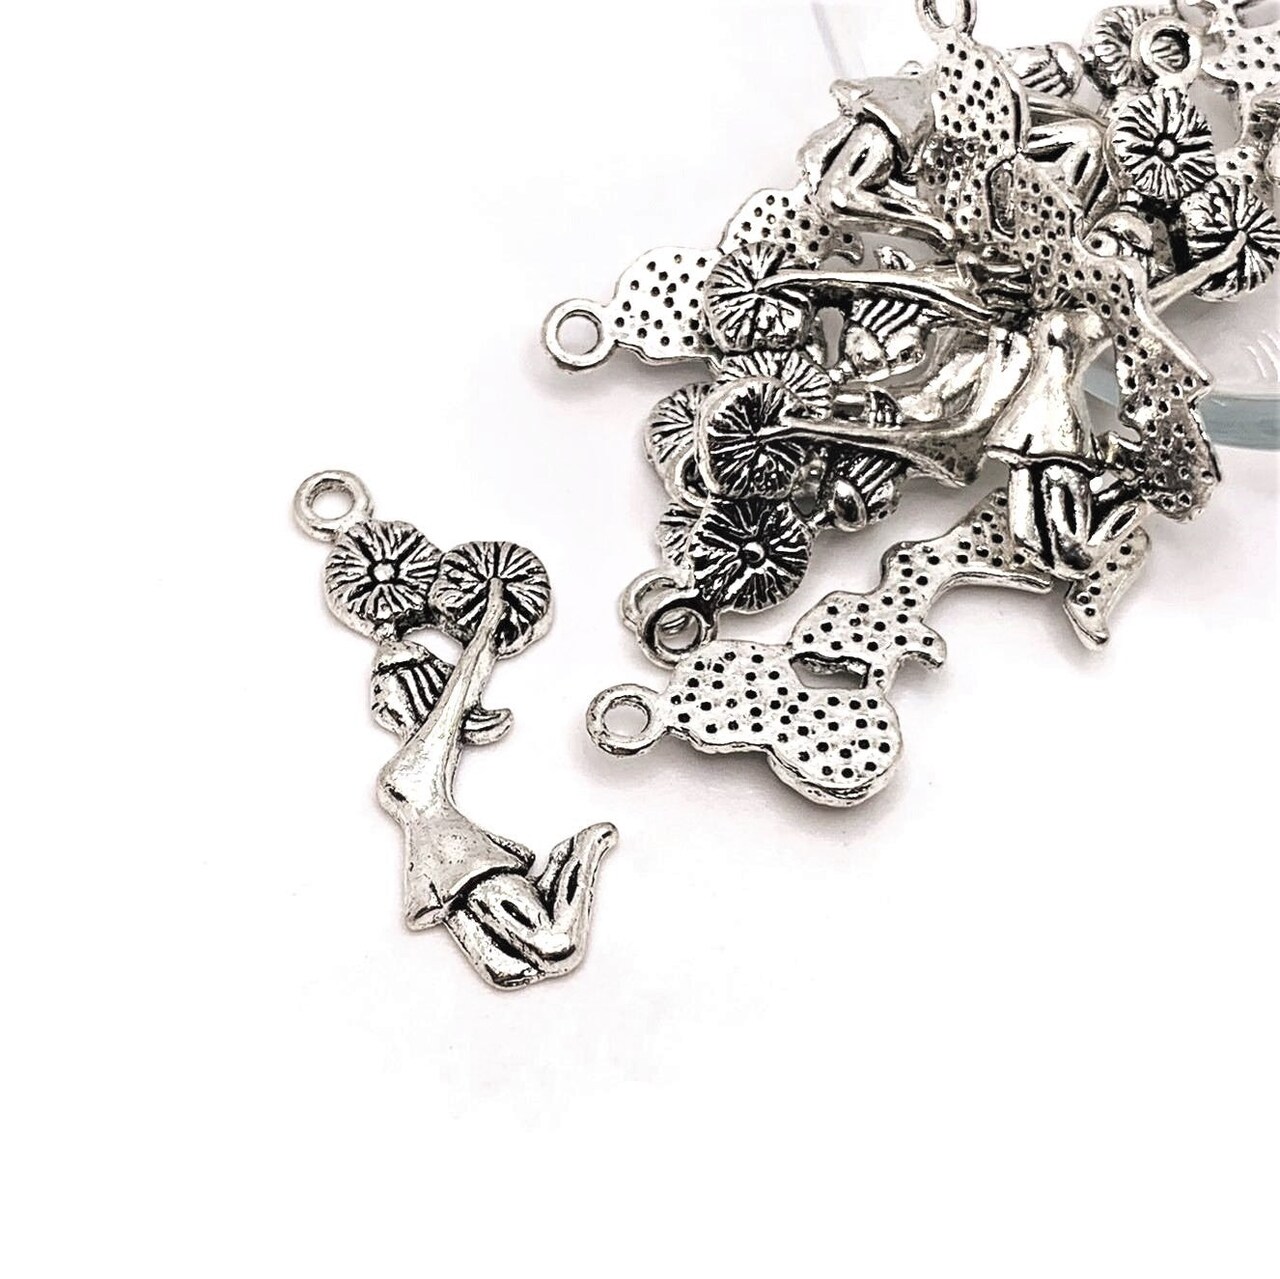 4, 20 or 50 Pieces: Silver Cheerleader with Pom Poms Charms